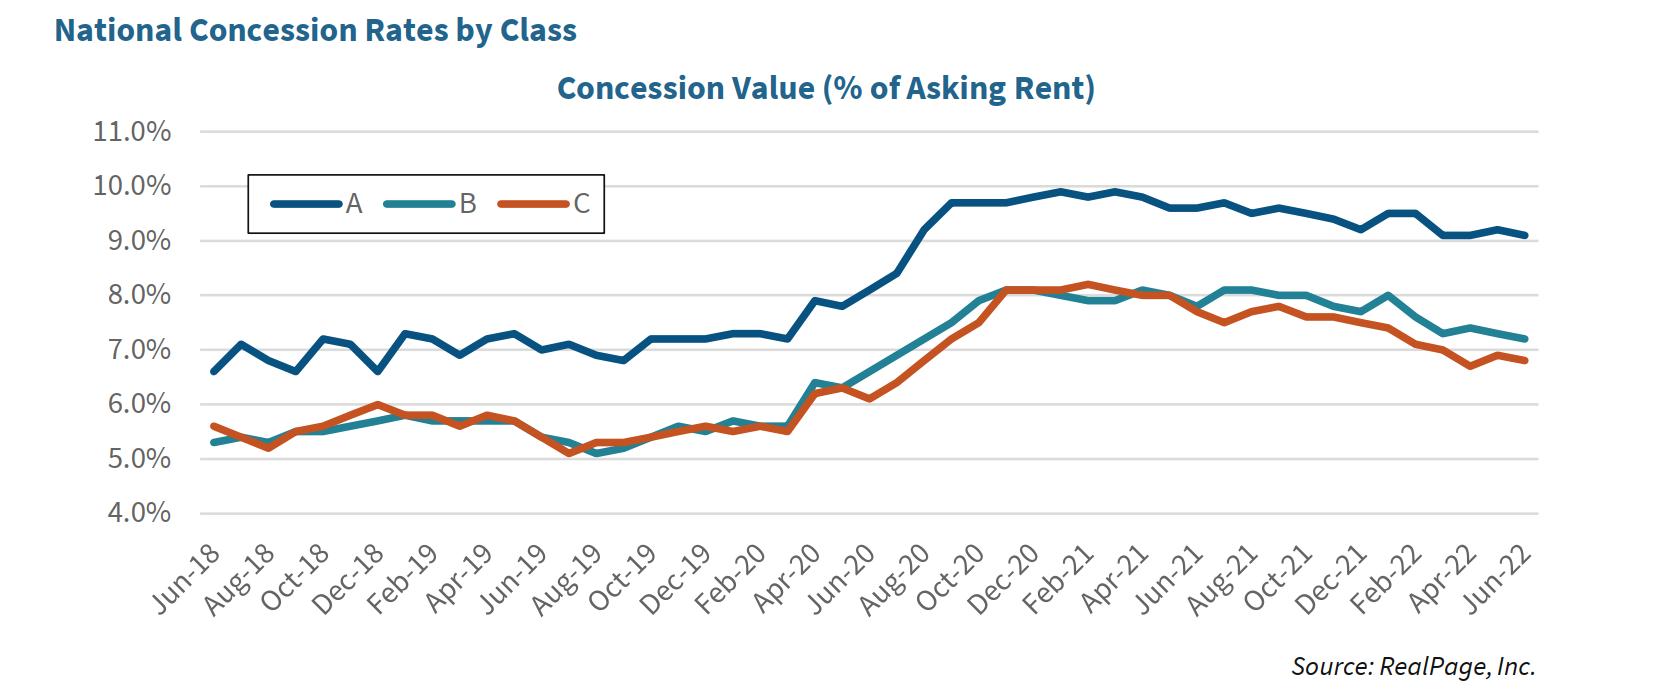 National Concession Rates by Class - Concession Value (% of Asking Rent)